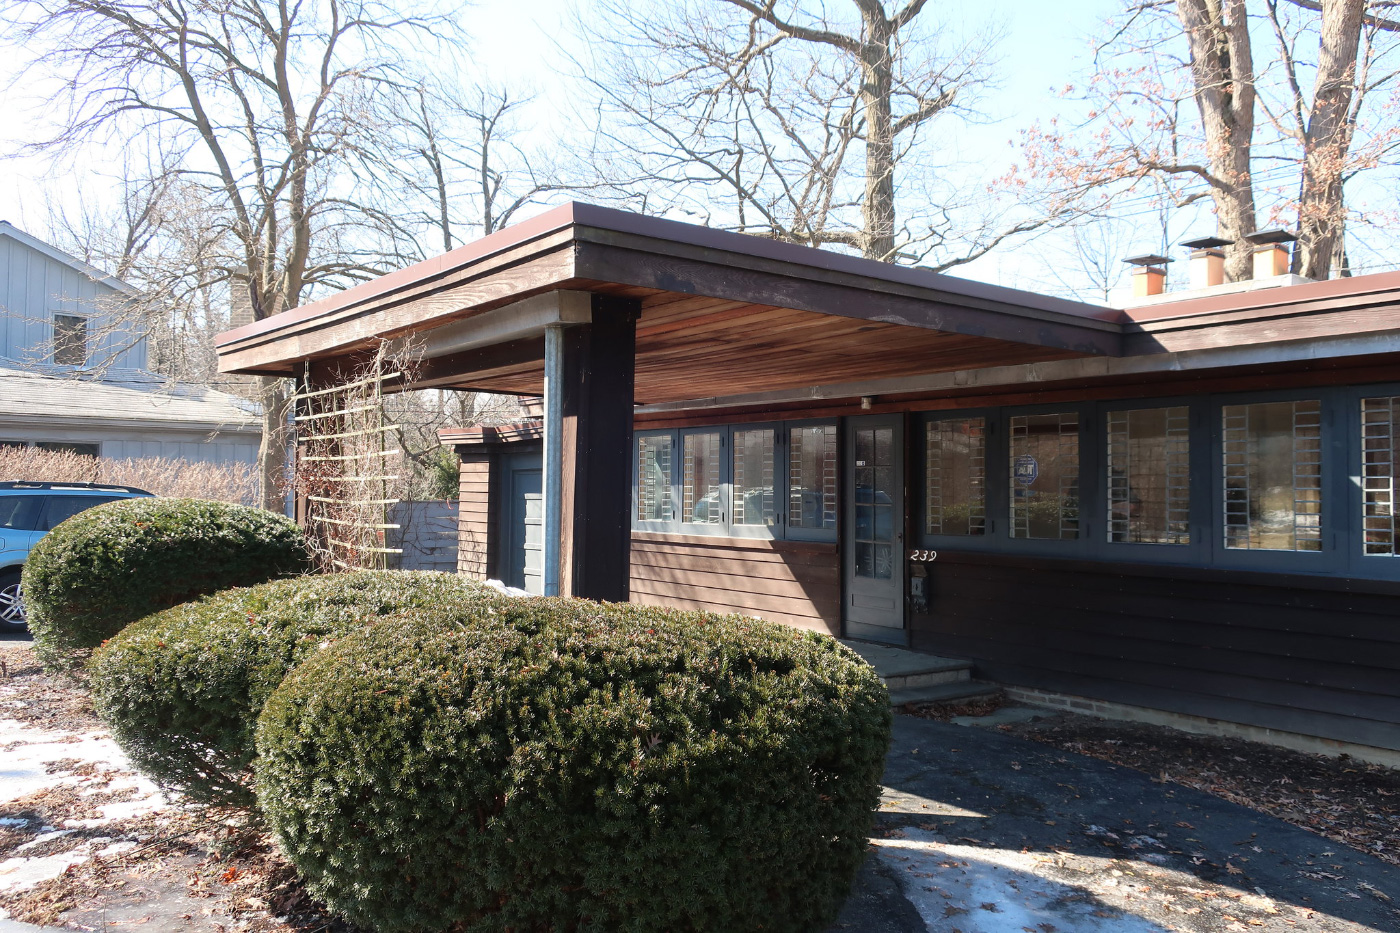 Photo of Booth Cottage, a Frank Lloyd Wright-designed low-slung wooden cottage with leaded windows and an entrance awning